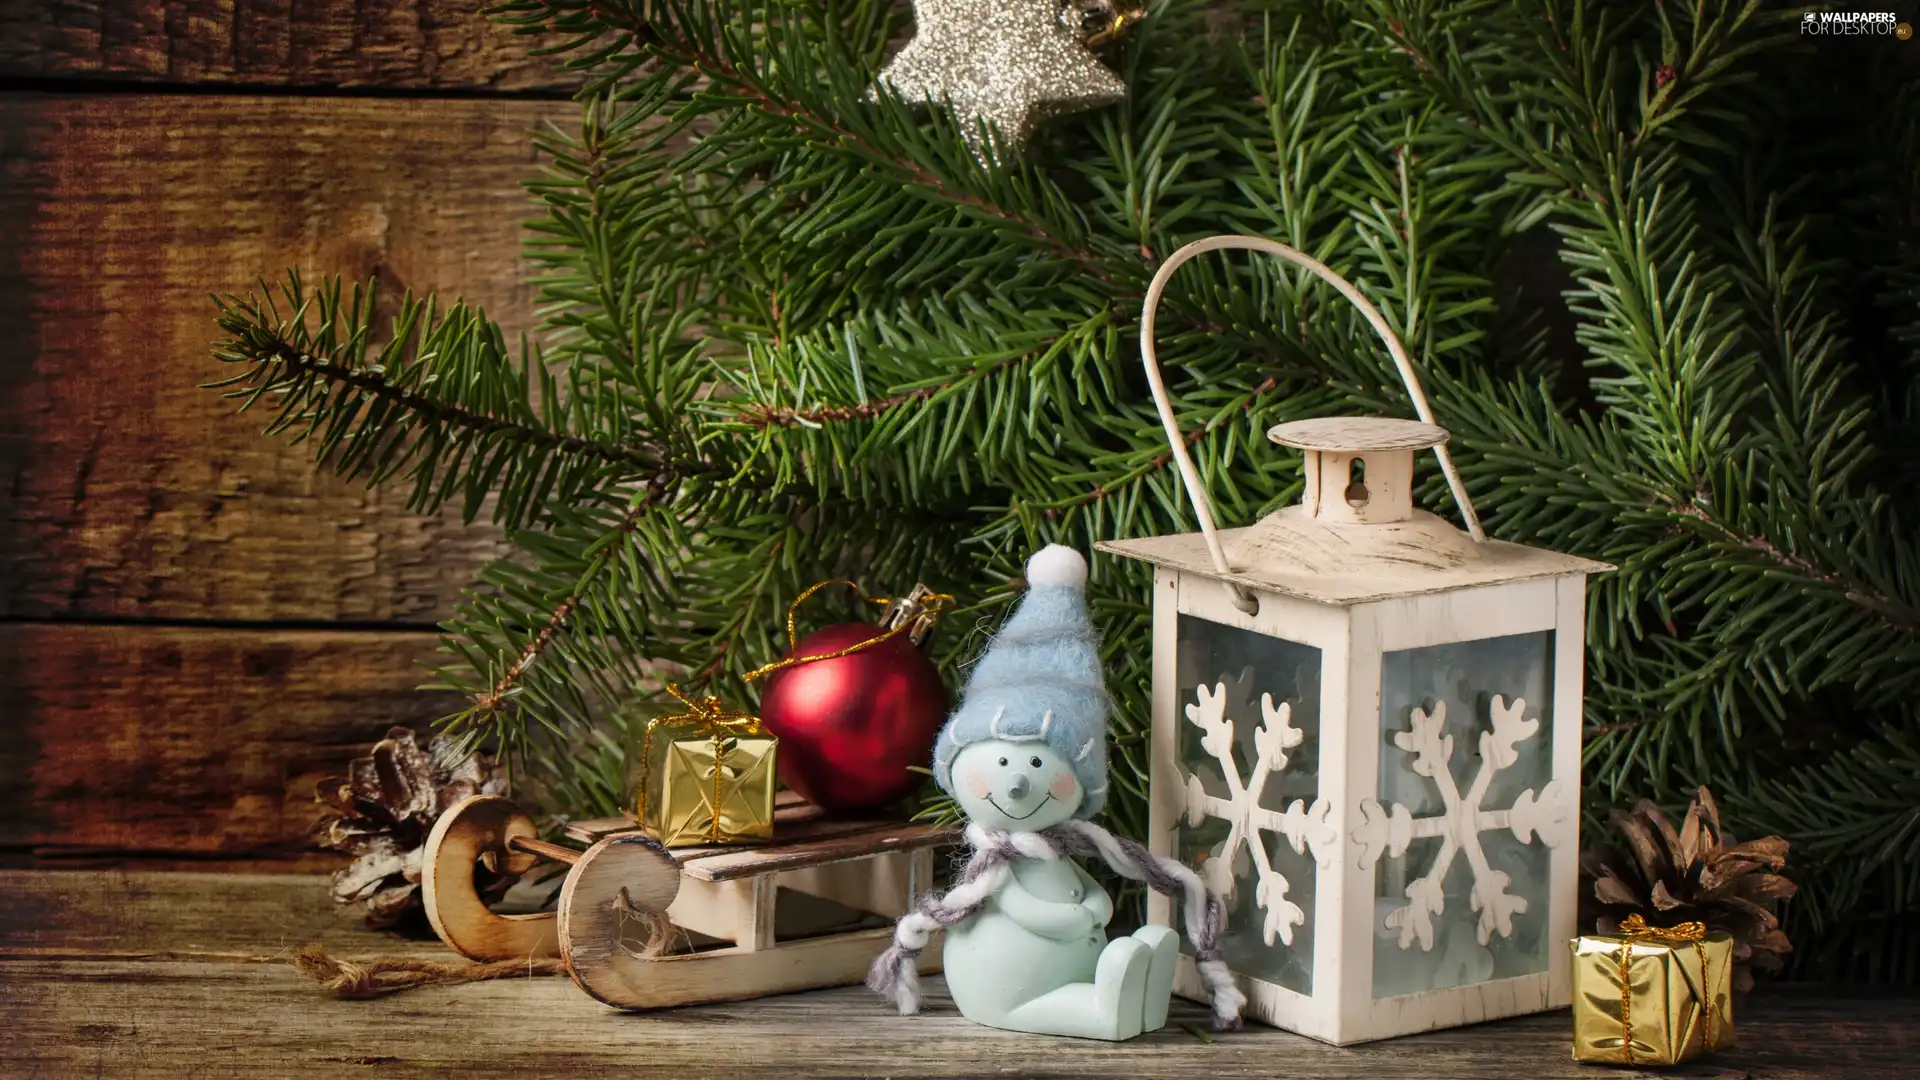 Christmas, composition, Twigs, spruce, Snowman, gifts, sledge, lantern, bauble